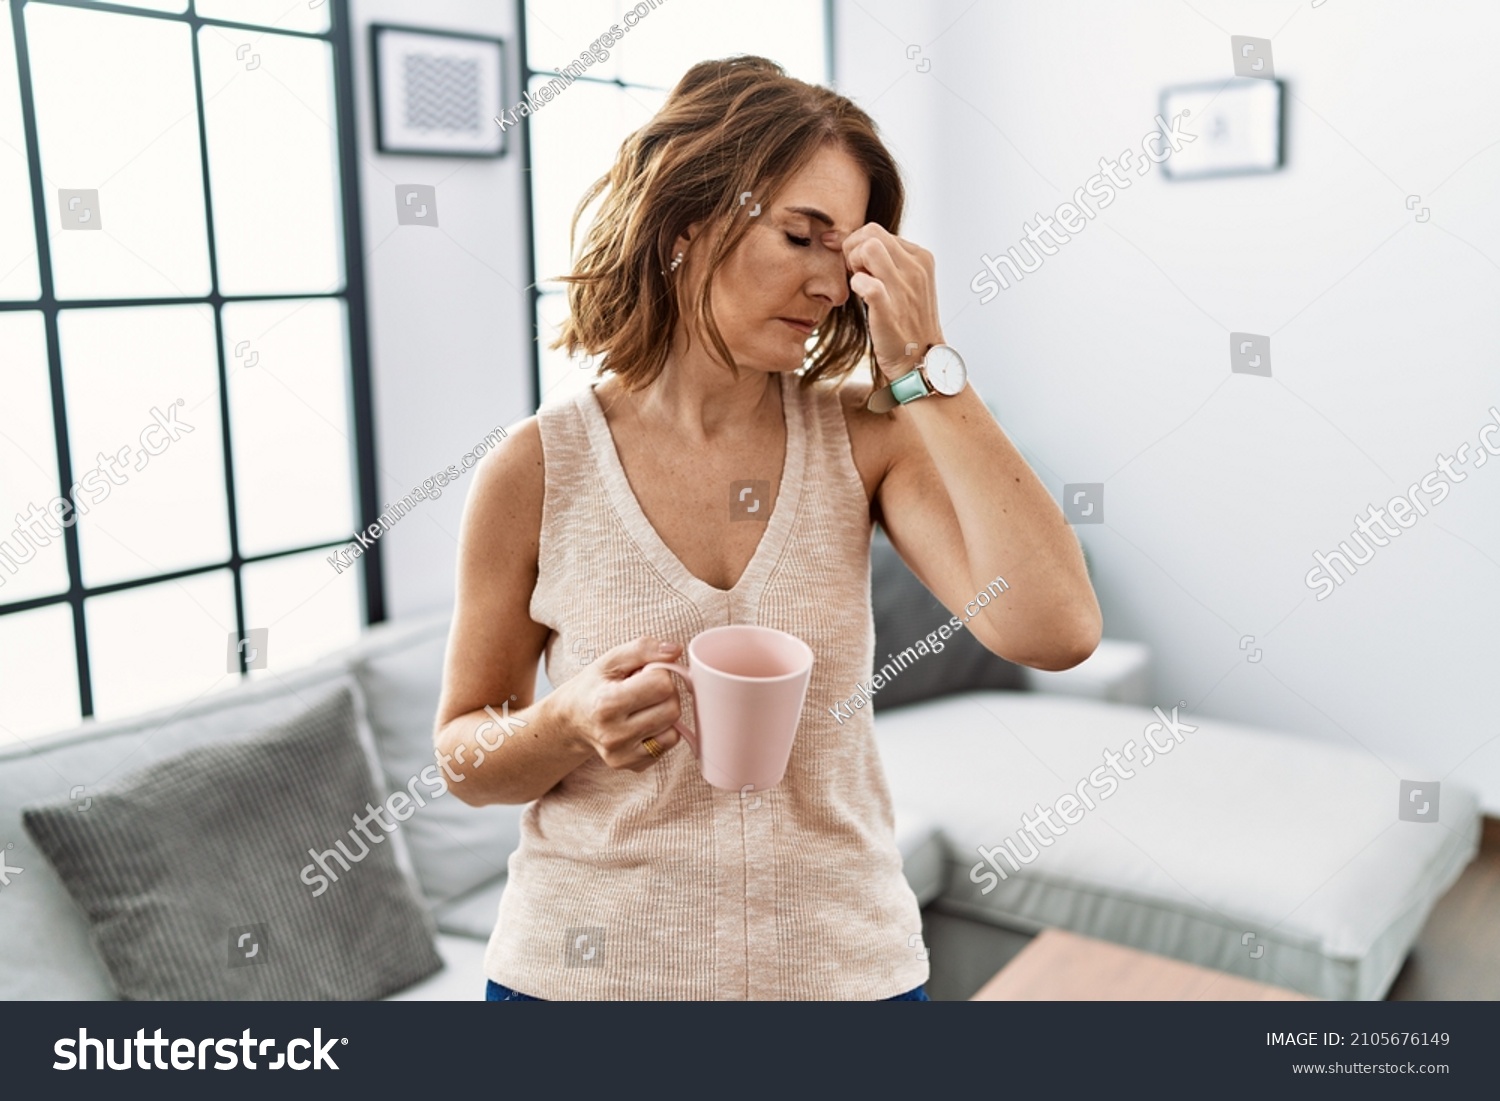 Middle age woman drinking a cup coffee at home tired rubbing nose and eyes feeling fatigue and headache. stress and frustration concept.  #2105676149